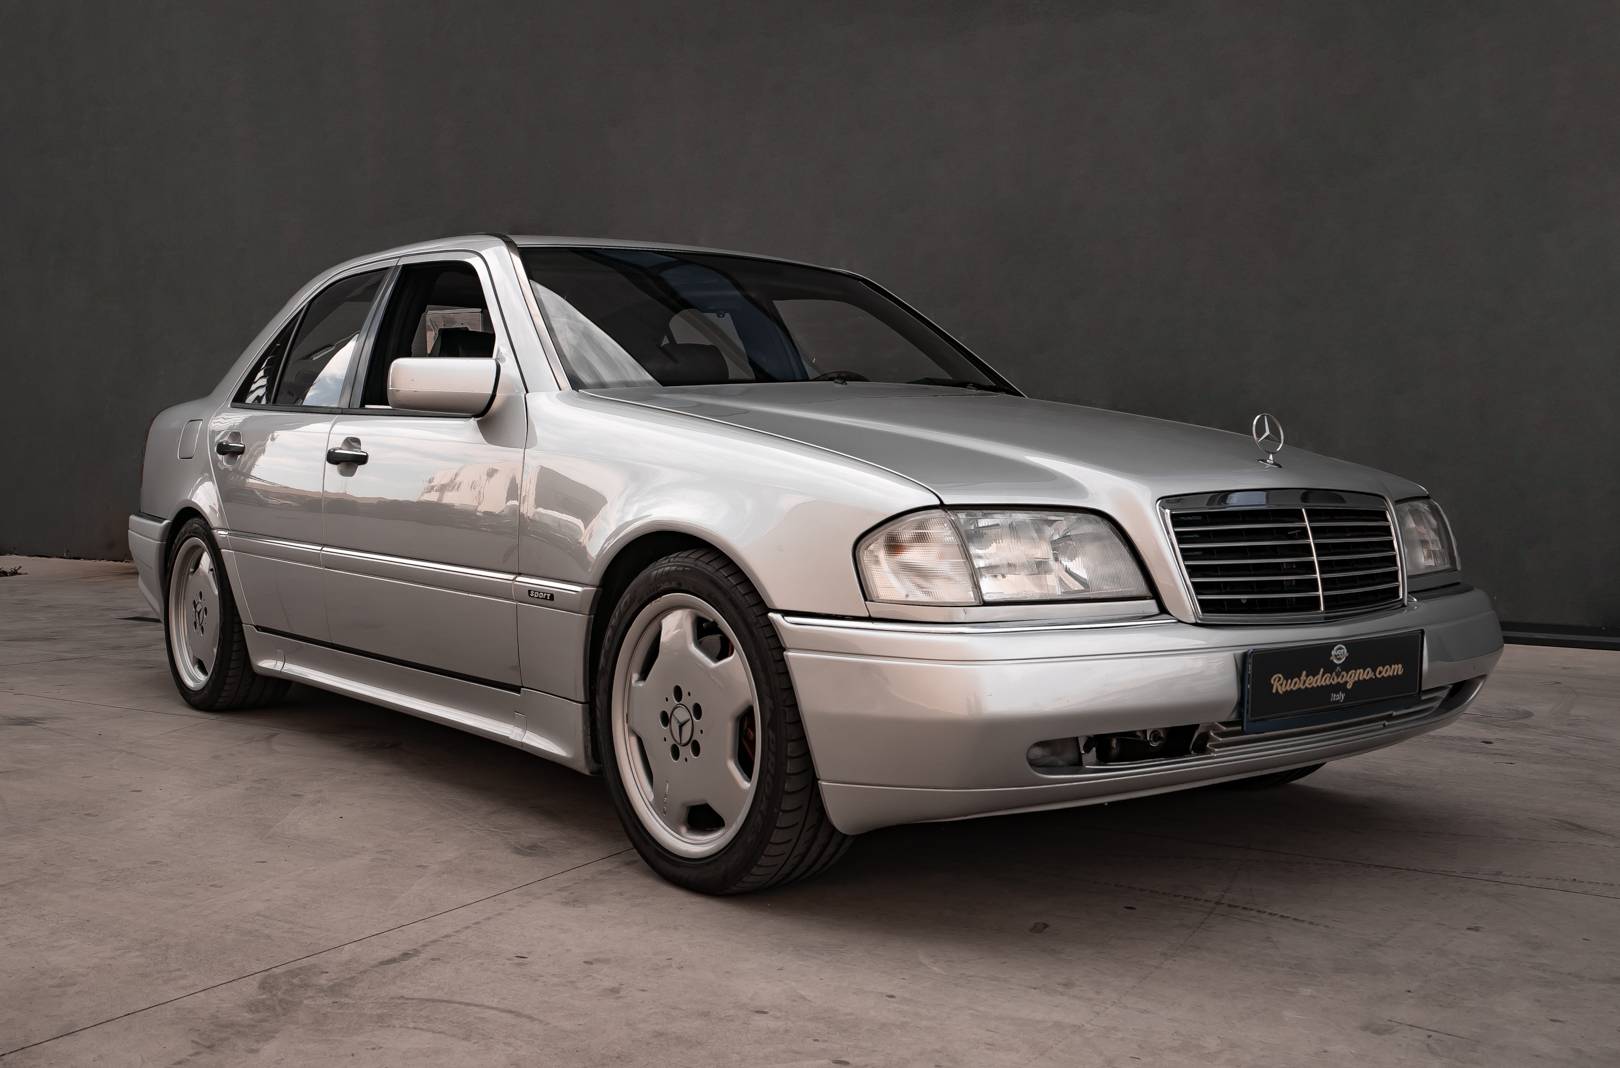 For Sale: Mercedes-Benz C 36 AMG (1995) offered for €37,000